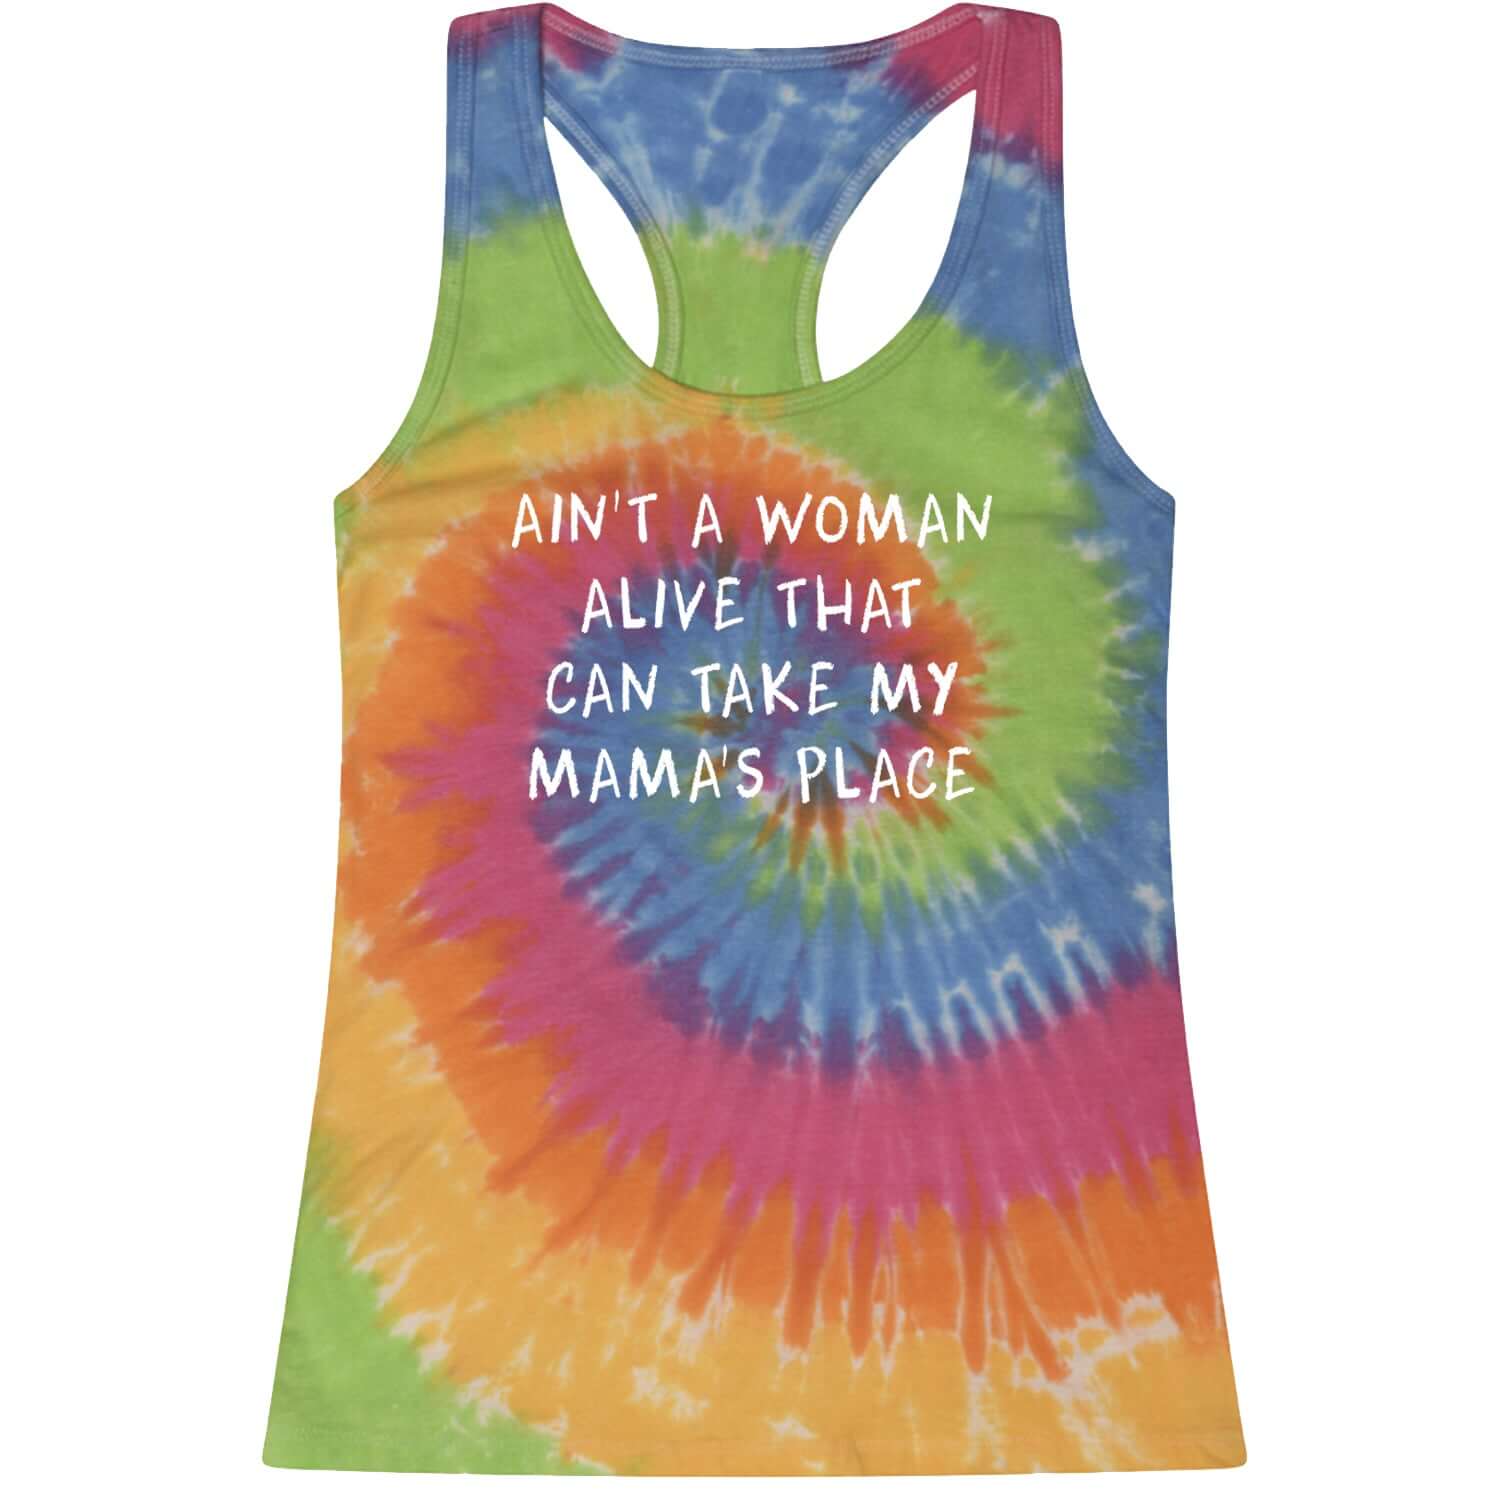 Ain't A Woman Alive That Can Take My Mama's Place Racerback Tank Top for Women 2pac, bear, day, mama, mom, mothers, shakur, tupac by Expression Tees